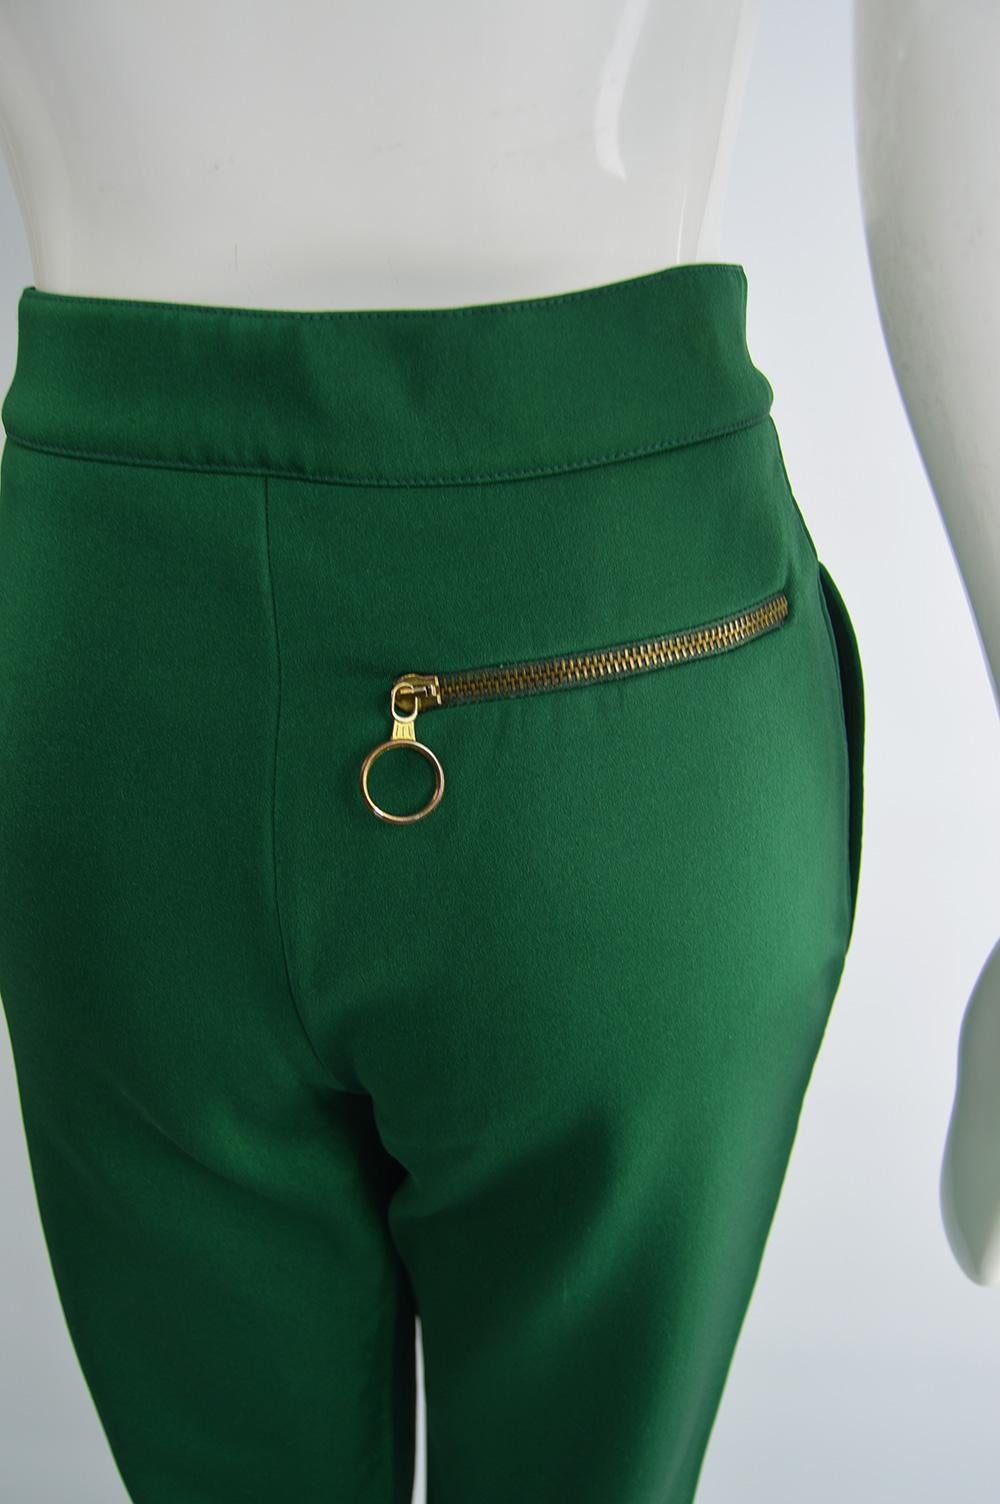 Moschino Green Stretch Jersey Slim Leg High Waist Vintage Pants, 1980s  For Sale 1